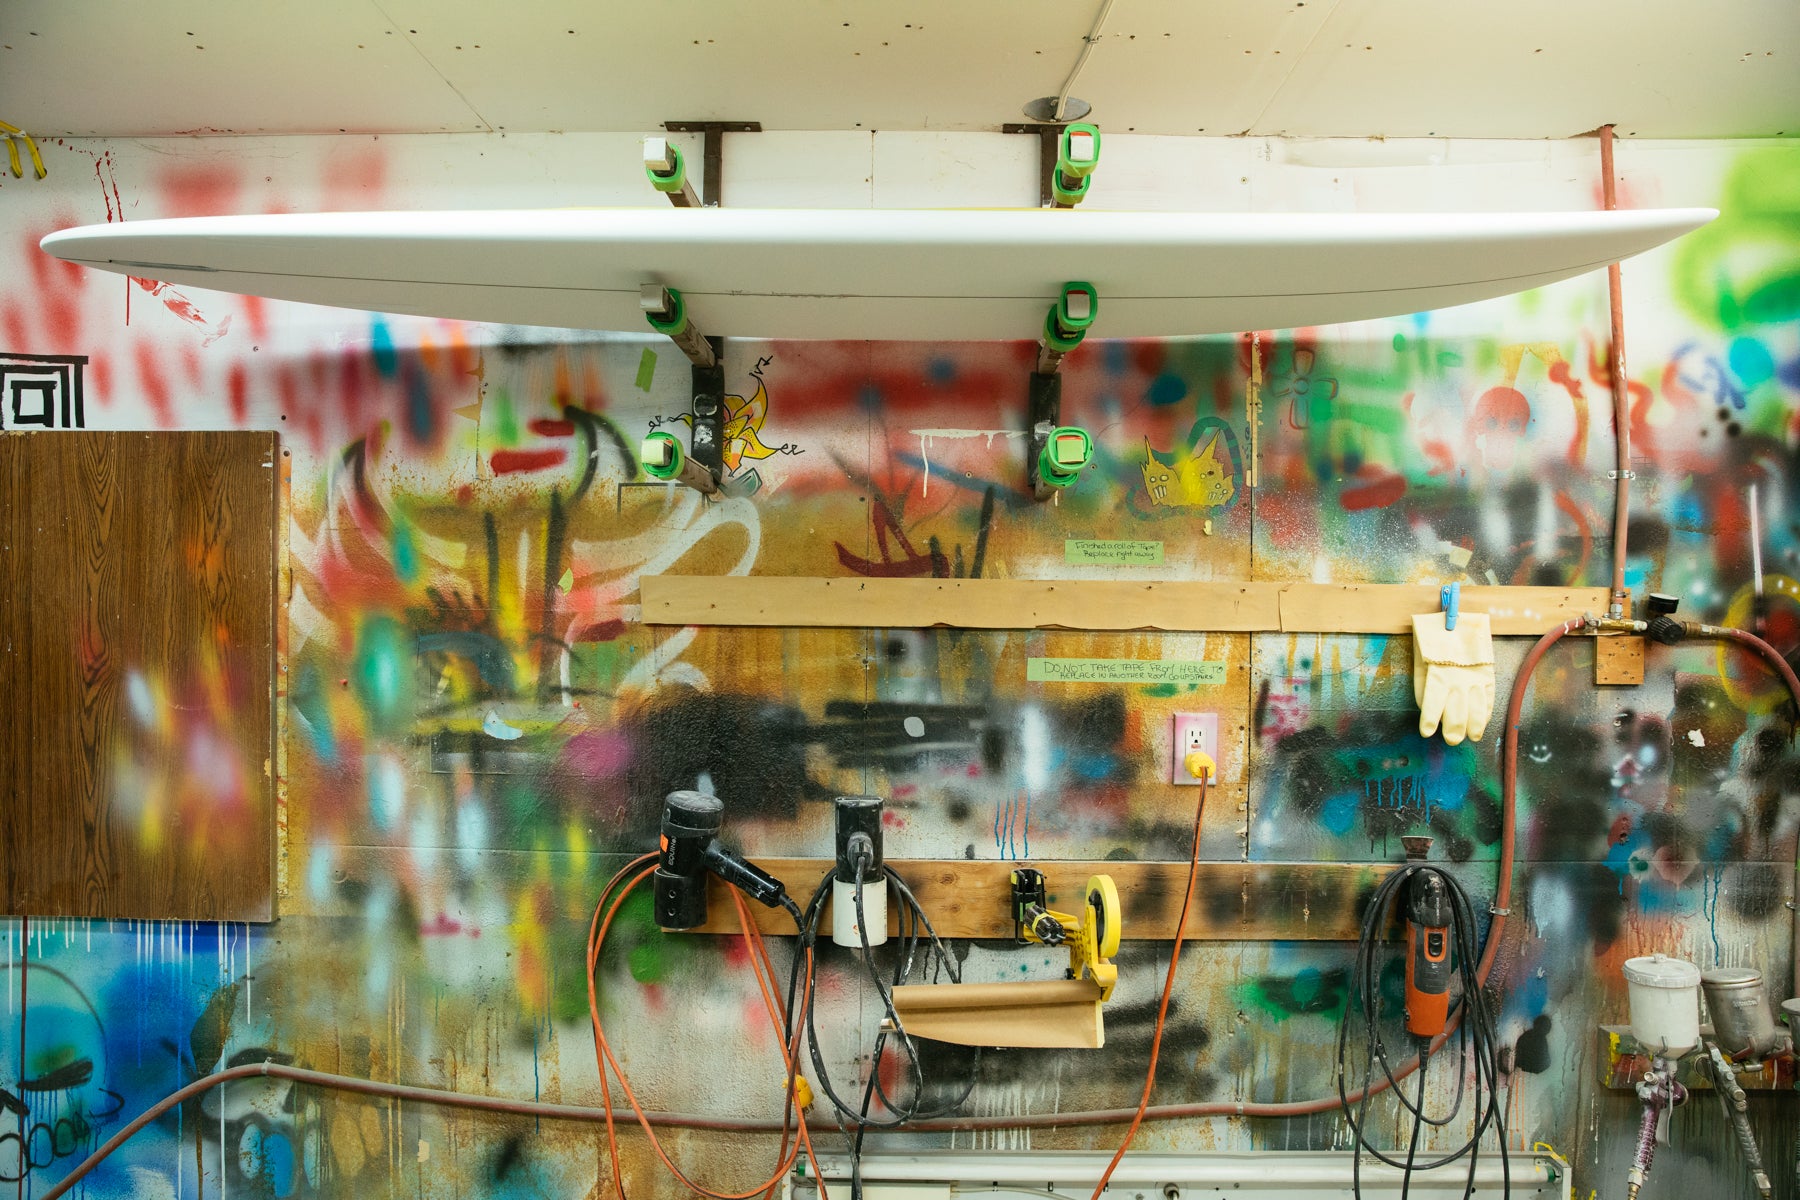 A blank surfboard hangs on a top shelving unit against a colourful spray painted backdrop in the Aftanas workshop. 